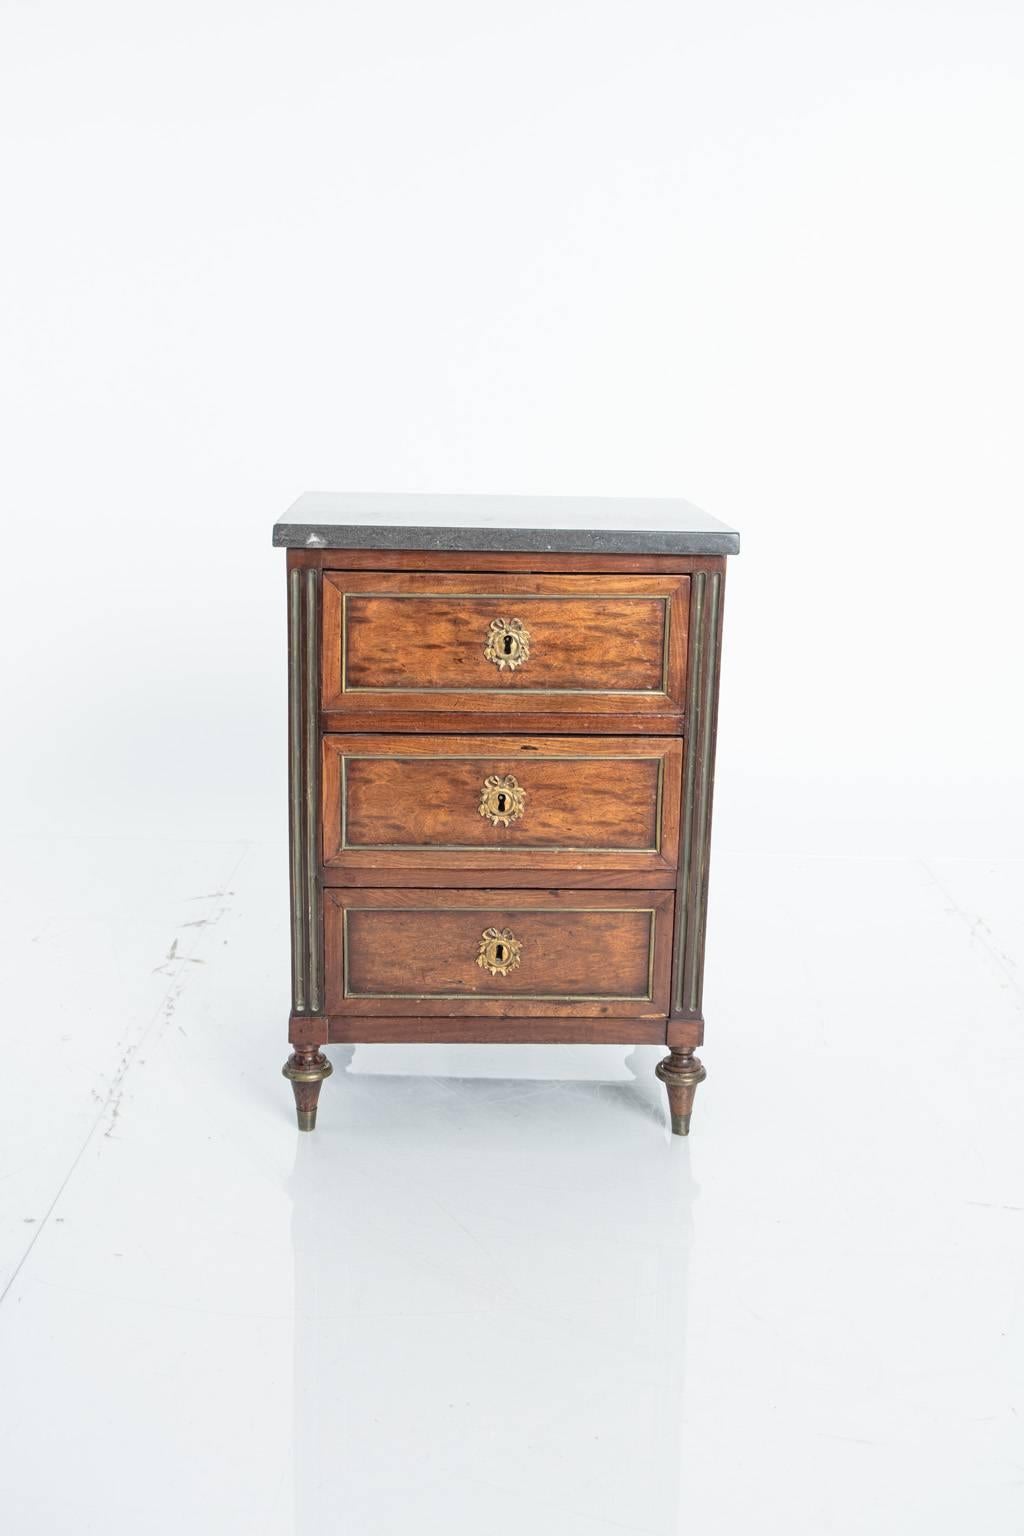 French three-drawer, fruitwood commode with bronze drawer surrounds.